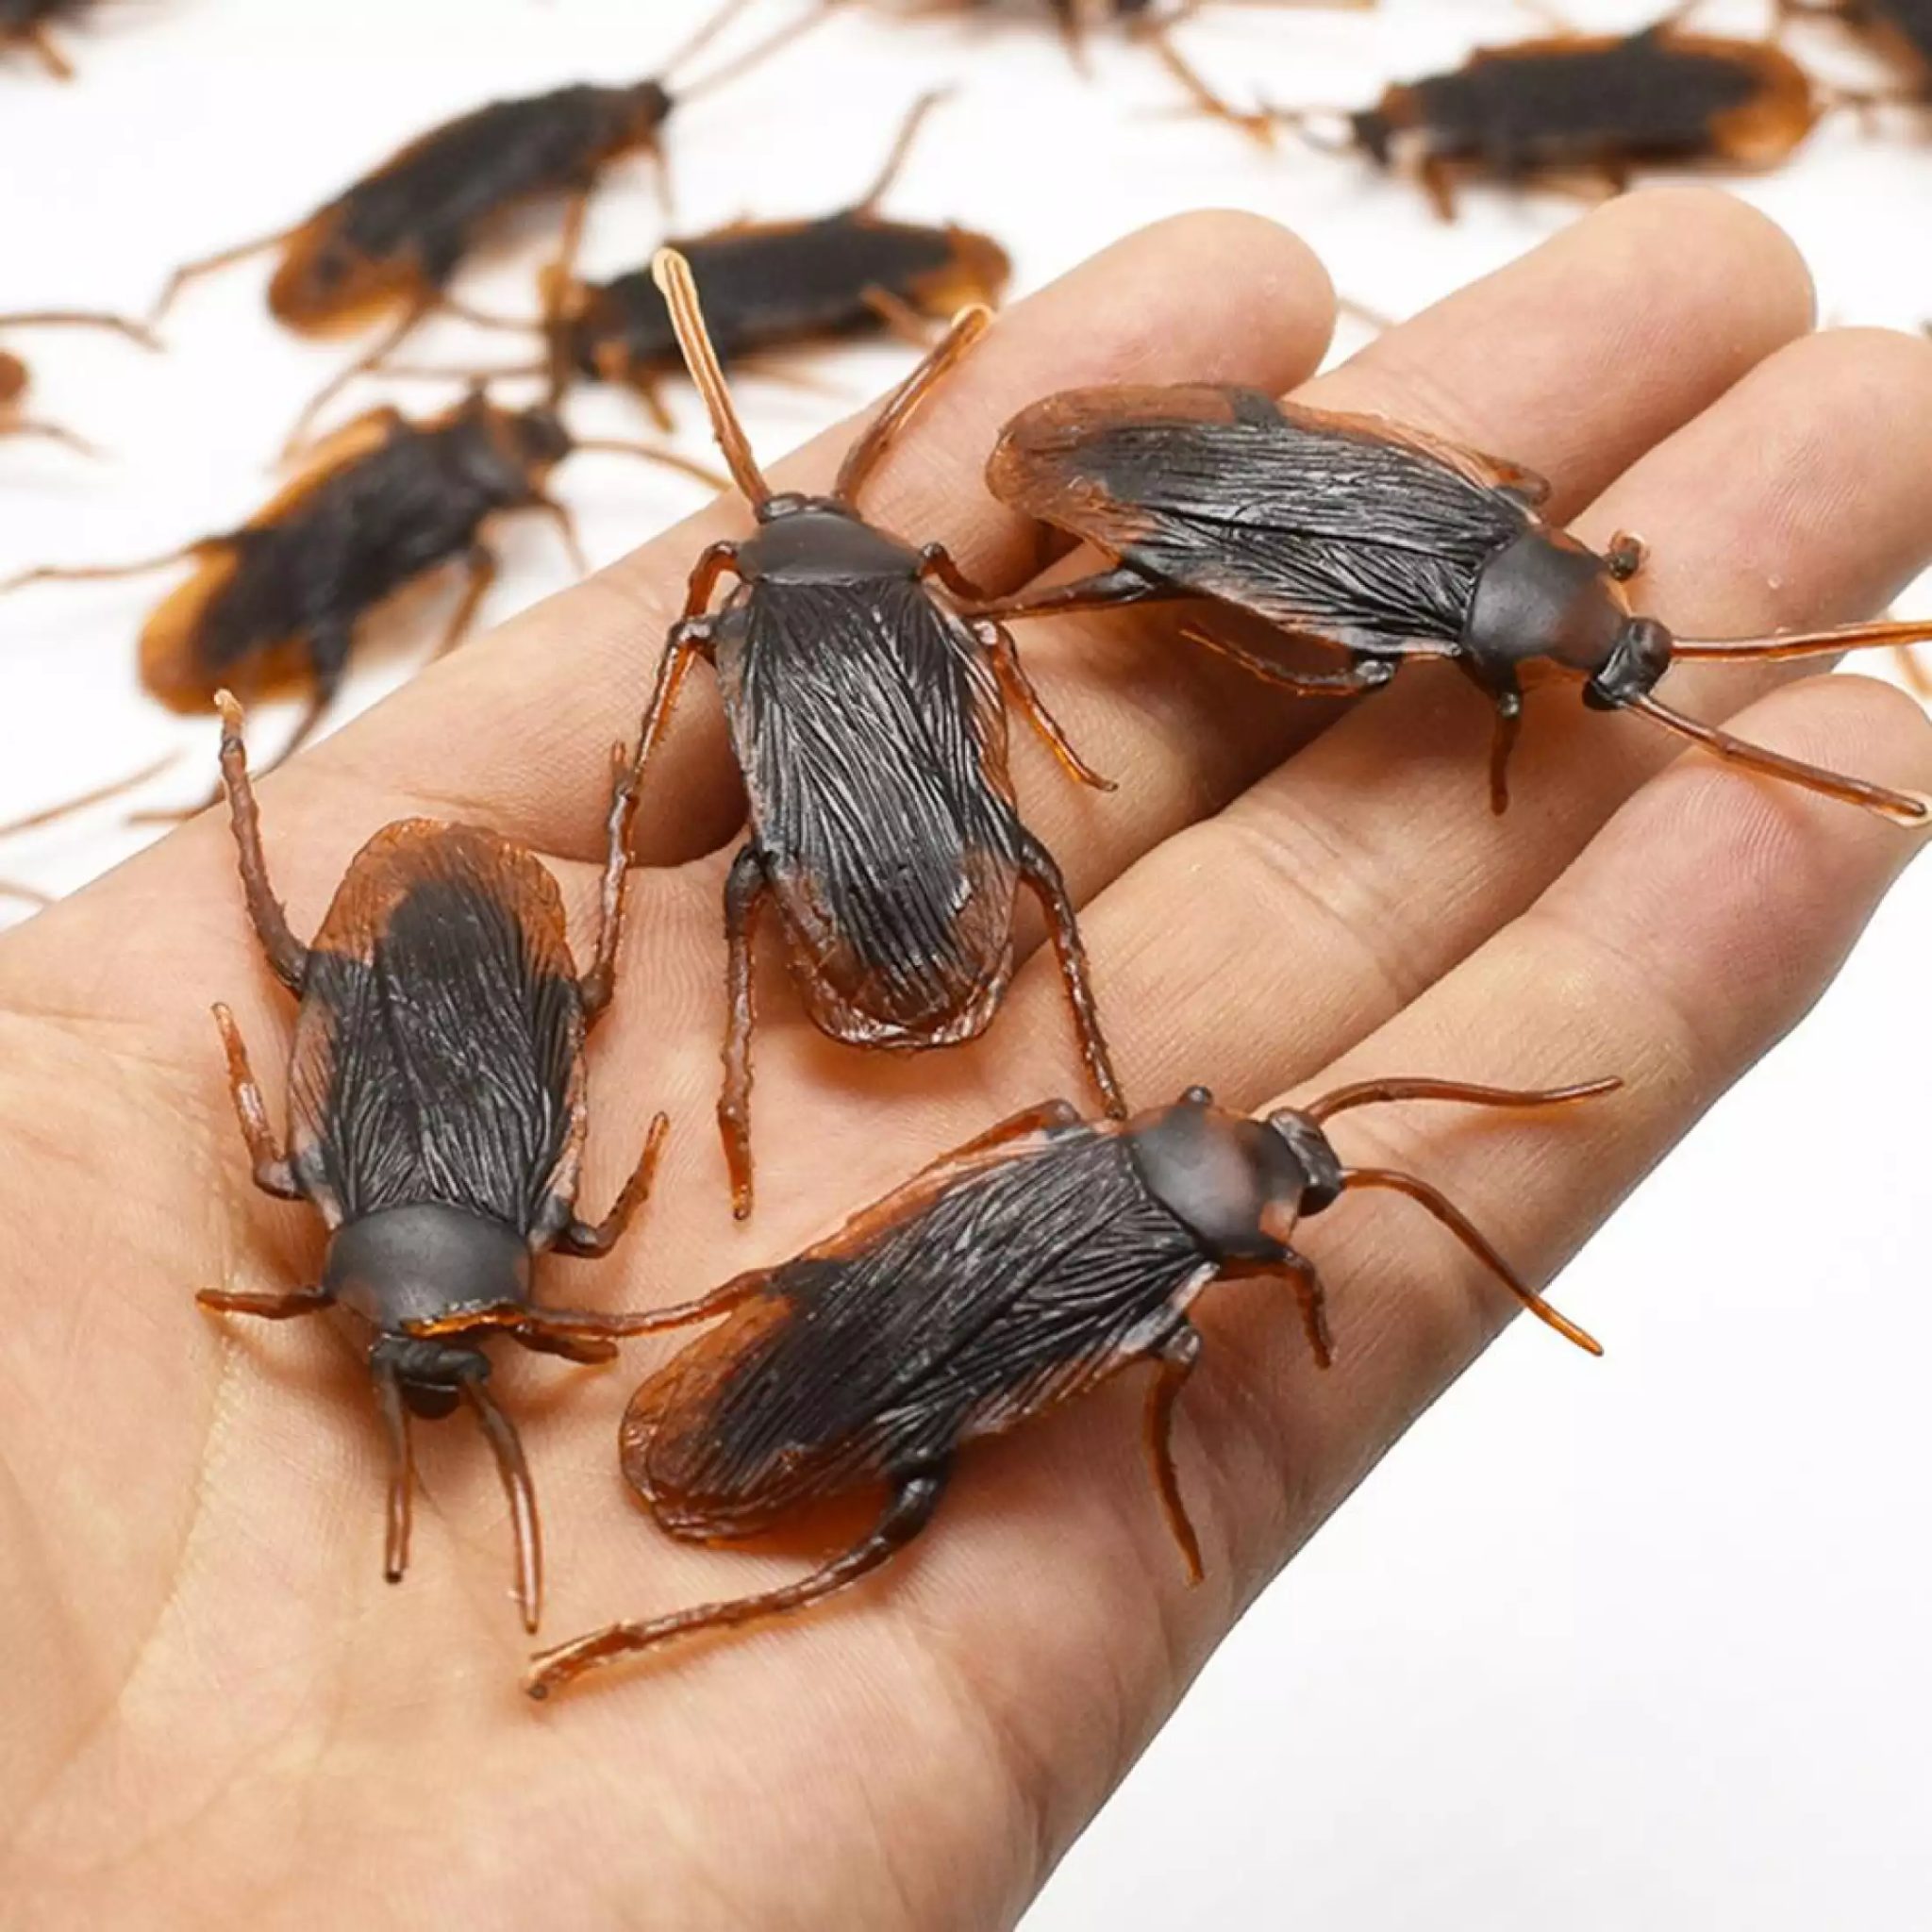 fake-cockroaches 